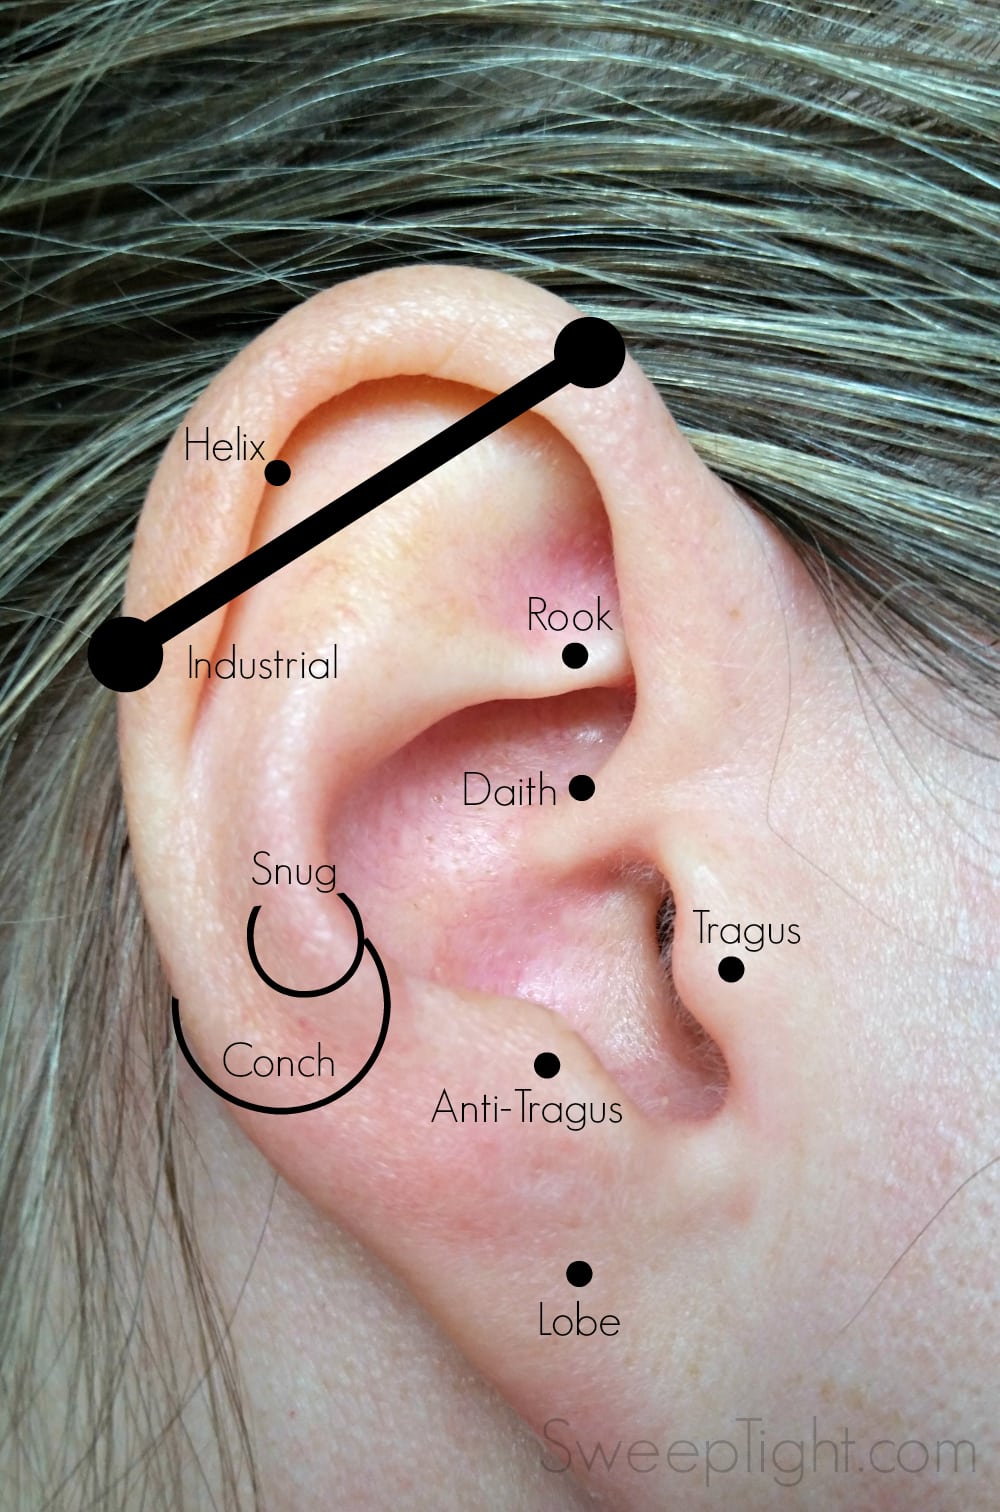 Trying Daith Piercing for Migraines after 20 Years of Pain